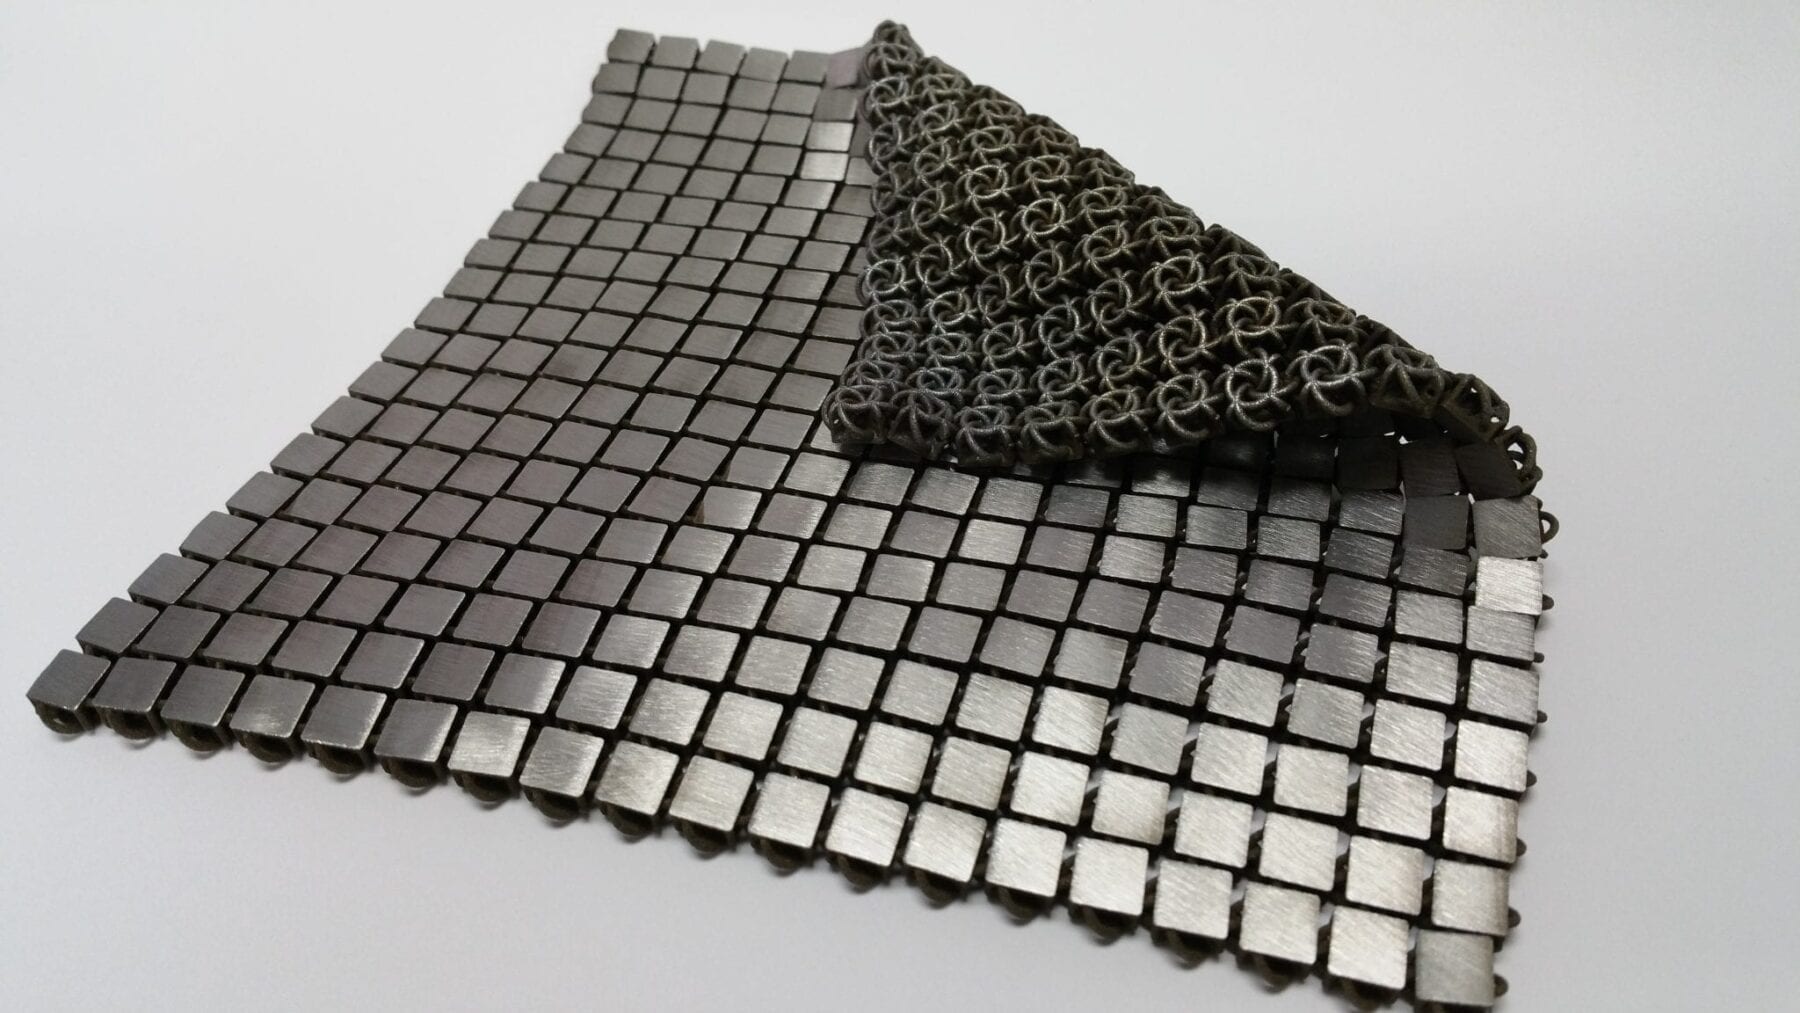 4D printing revolution in advanced woven metal fabrics for use in space